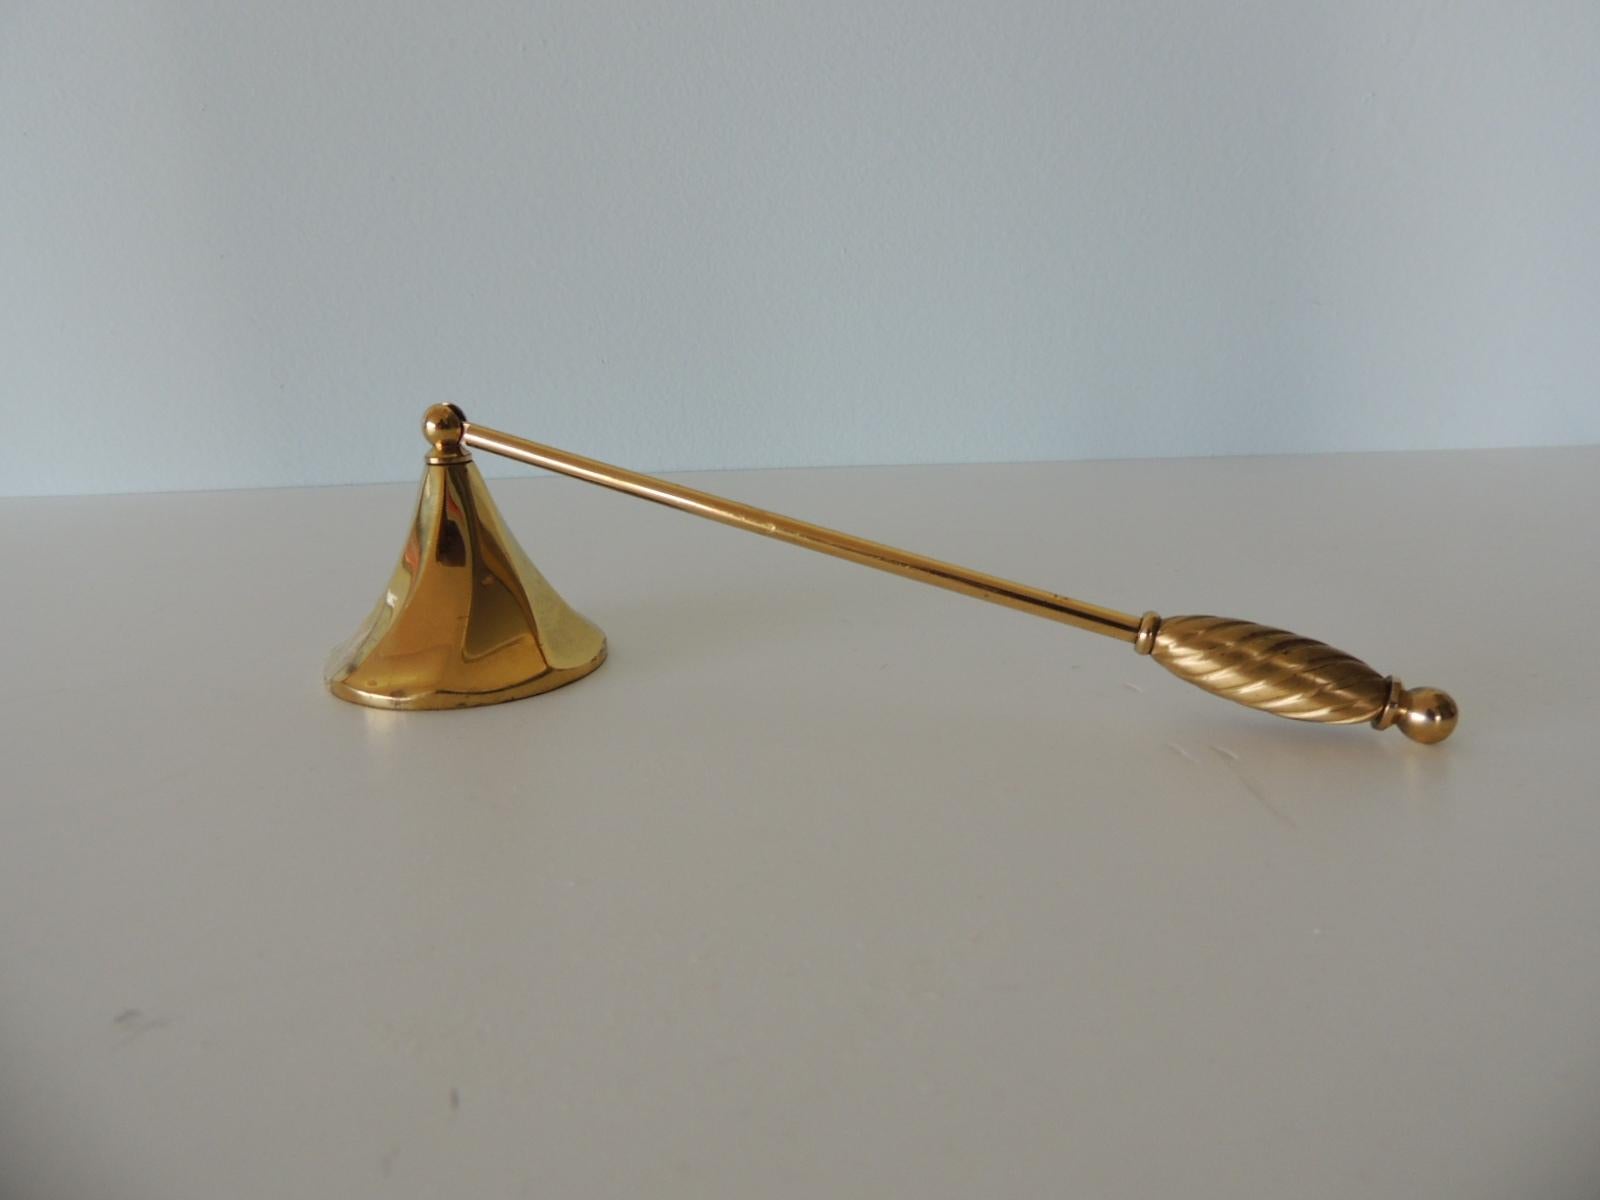 Polished brass trumpet shape candle snuffer 
Size: 9